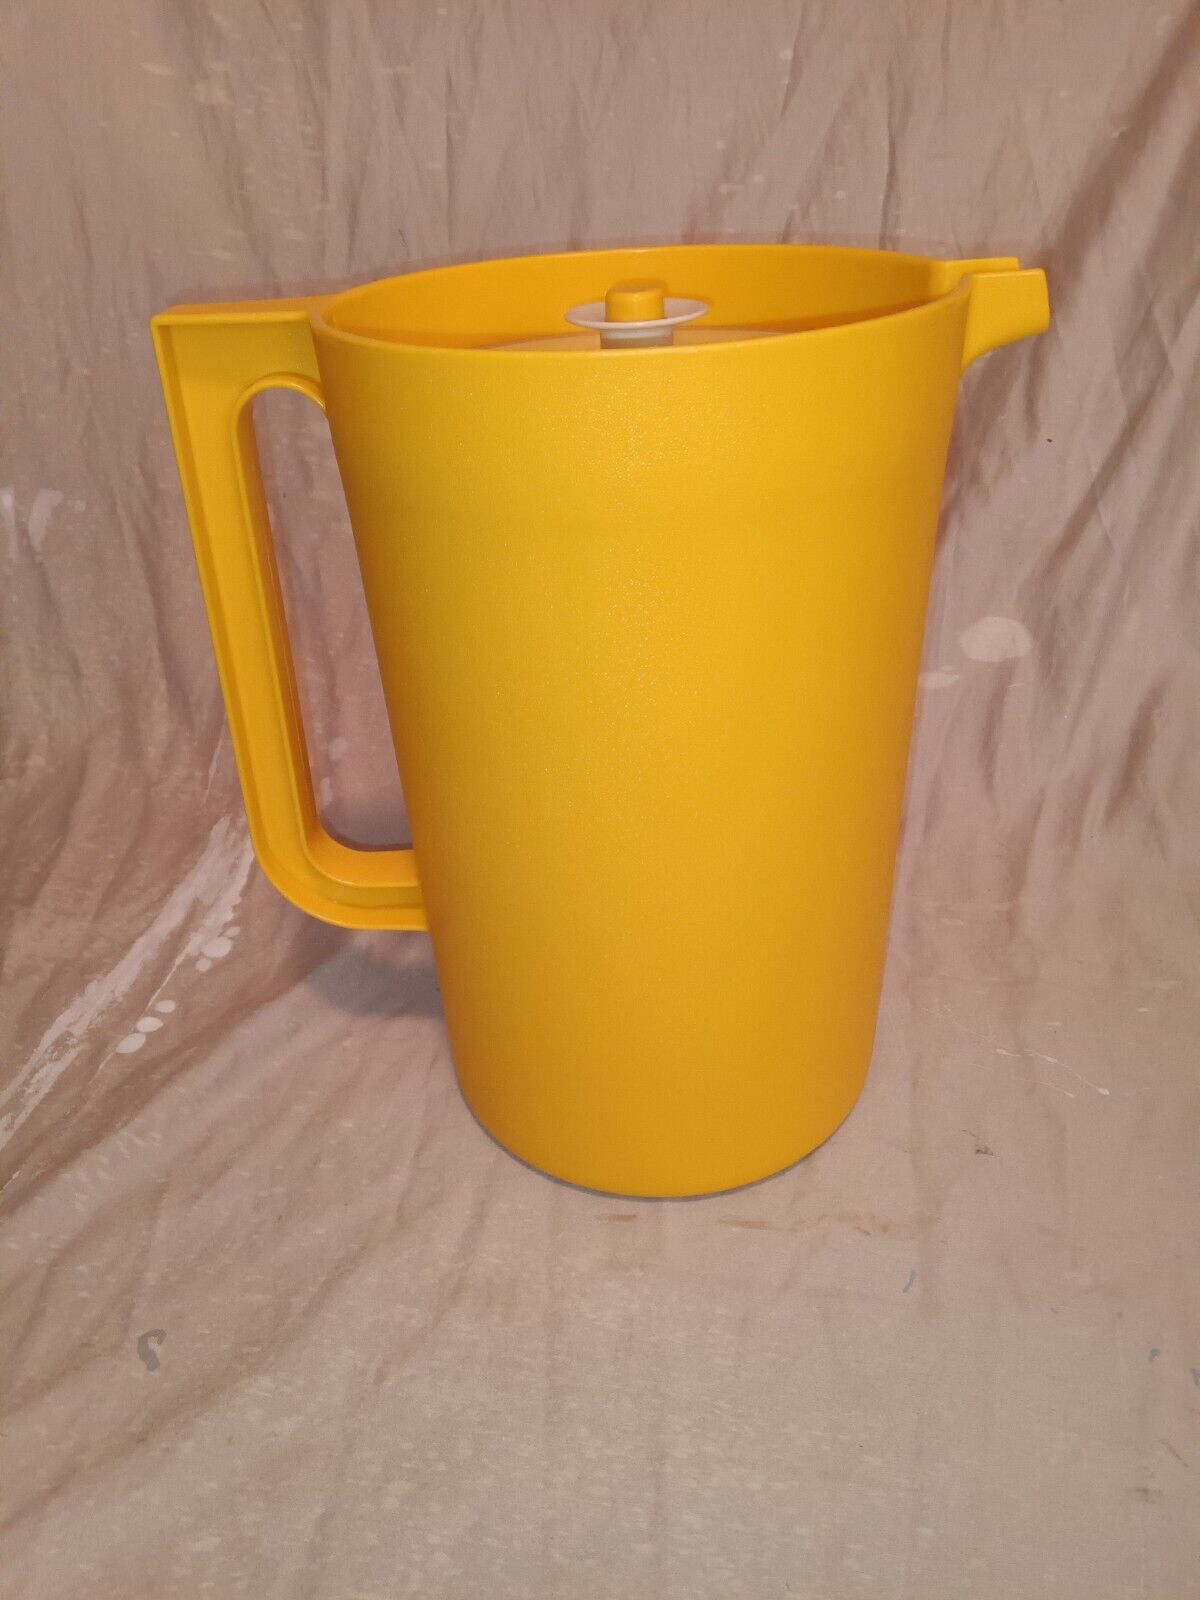 Vintage Tupperware Sunny Yellow One Gallon Pitcher With Push Button Lid #1416-2